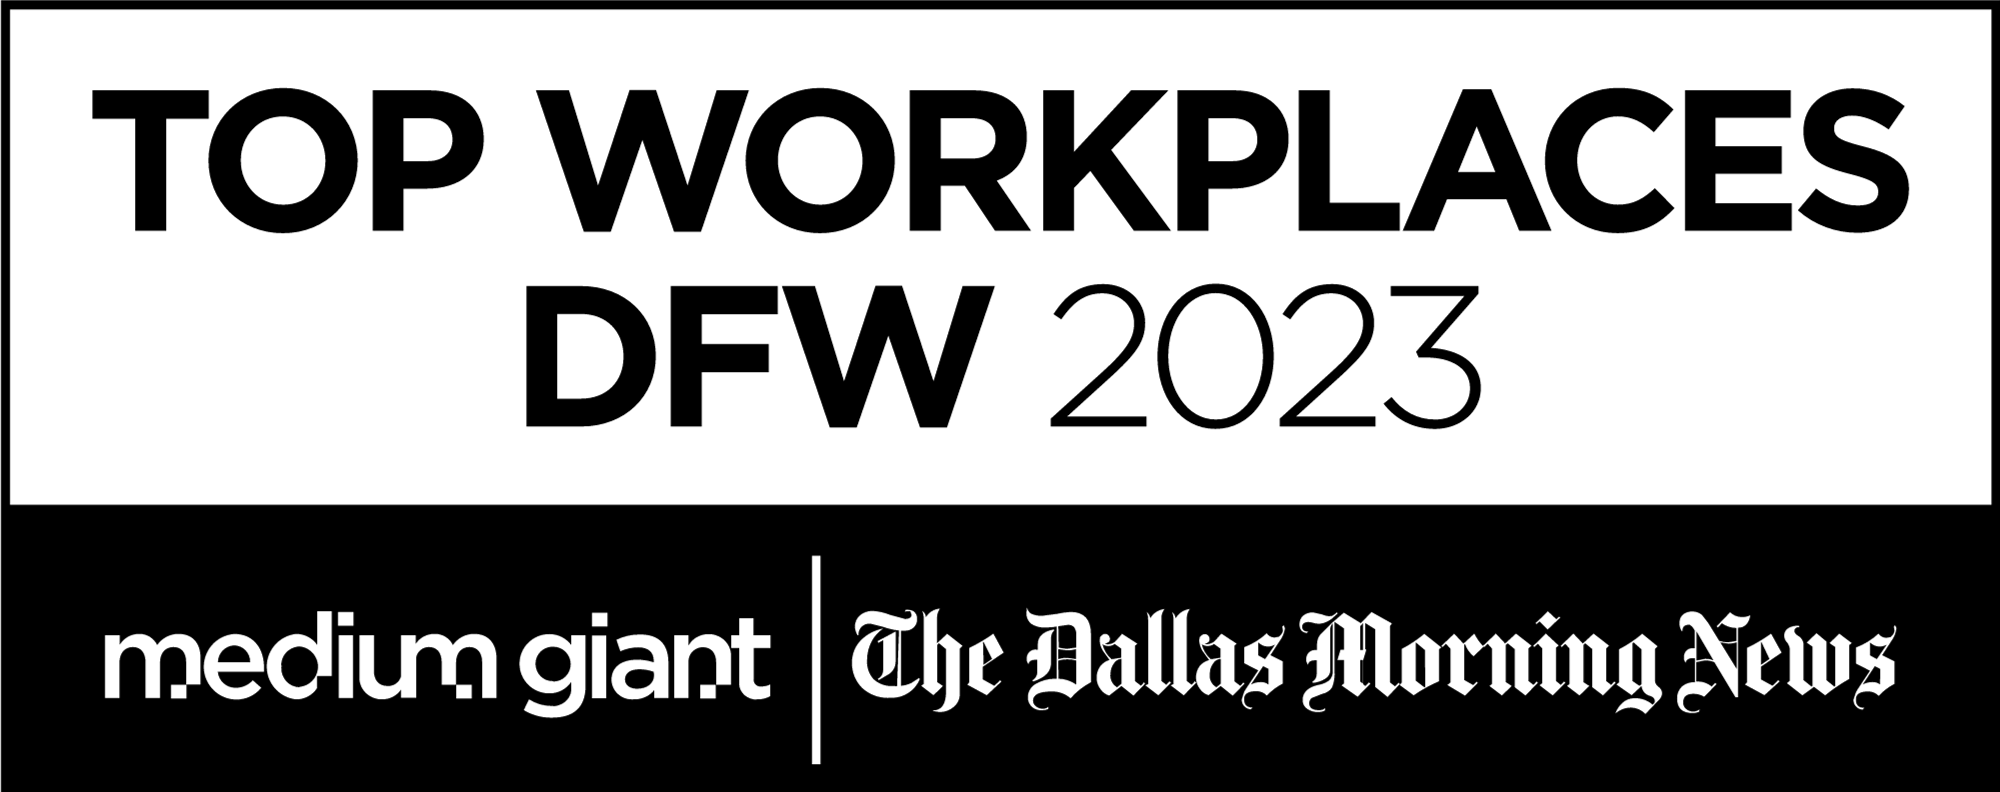 Dallas Morning News Top Workplaces DFW 2023